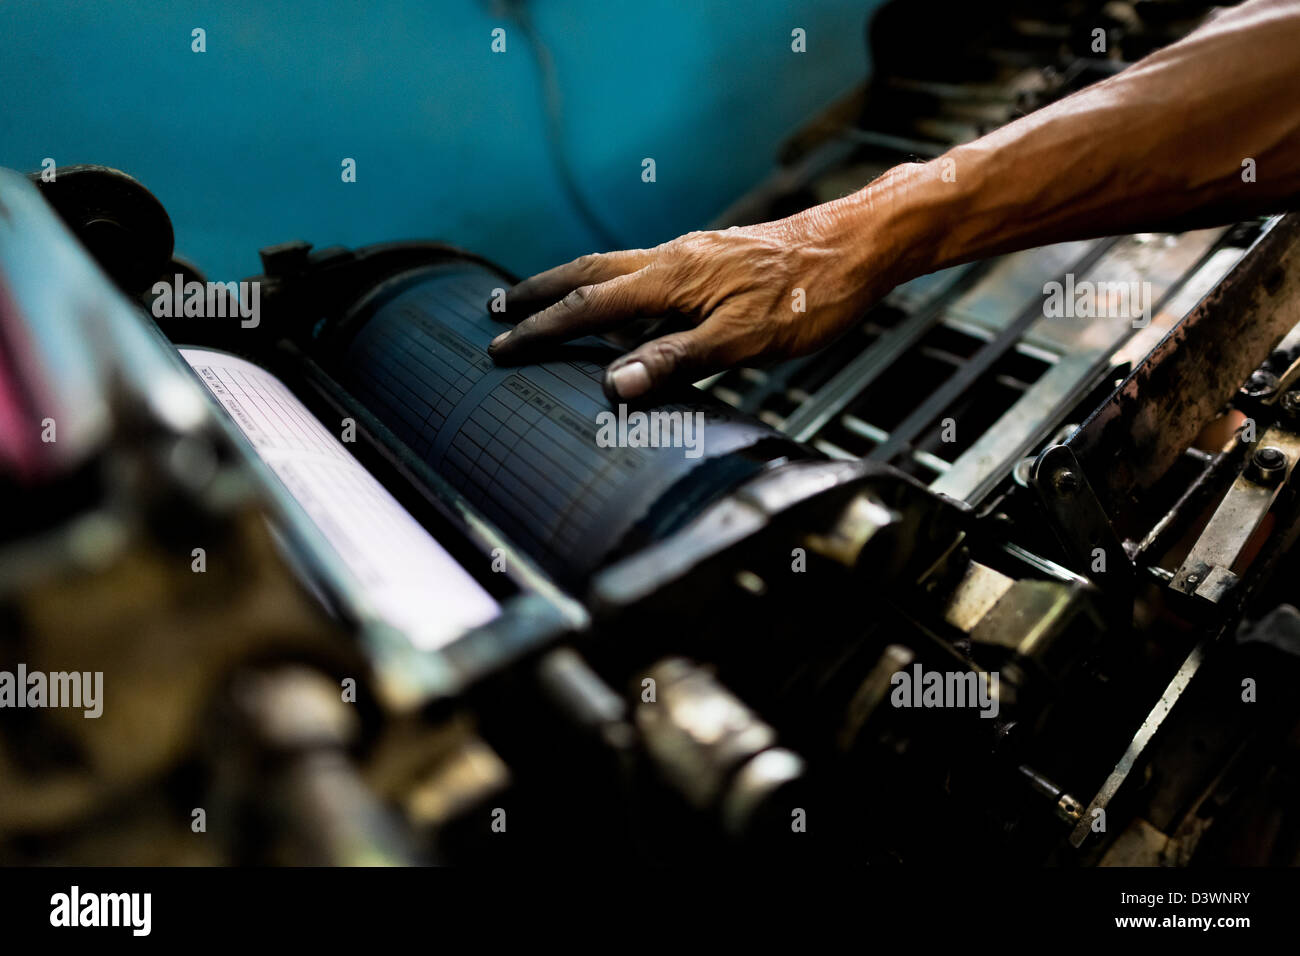 A Colombian master printer works on the letterpress machine in the print shop in Cali, Colombia. Stock Photo